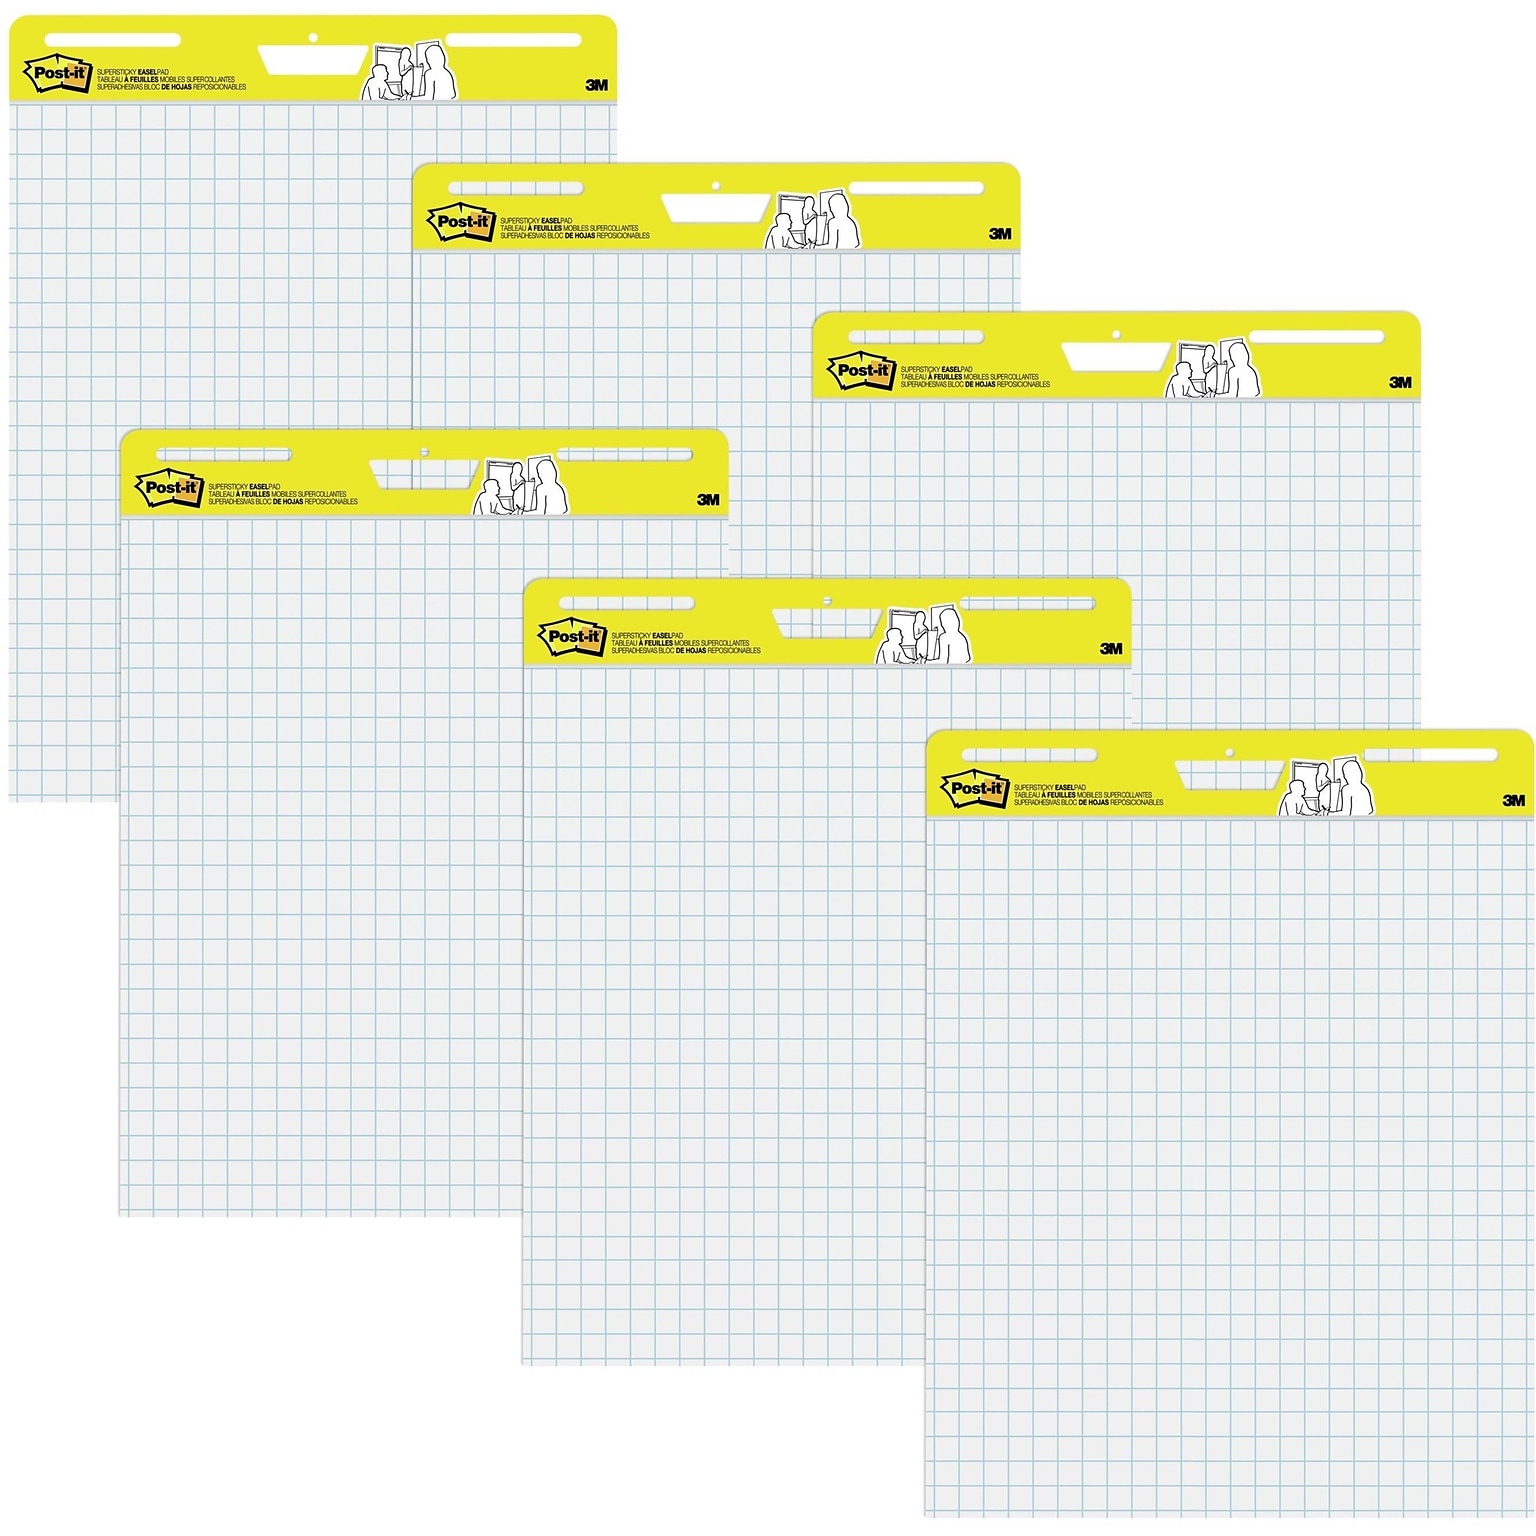 Post-it Super Sticky Wall Easel Pad, 25 x 30, Grid Lined, 30 Sheets/Pad, 6 Pads/Pack (560 VAD 6PK)